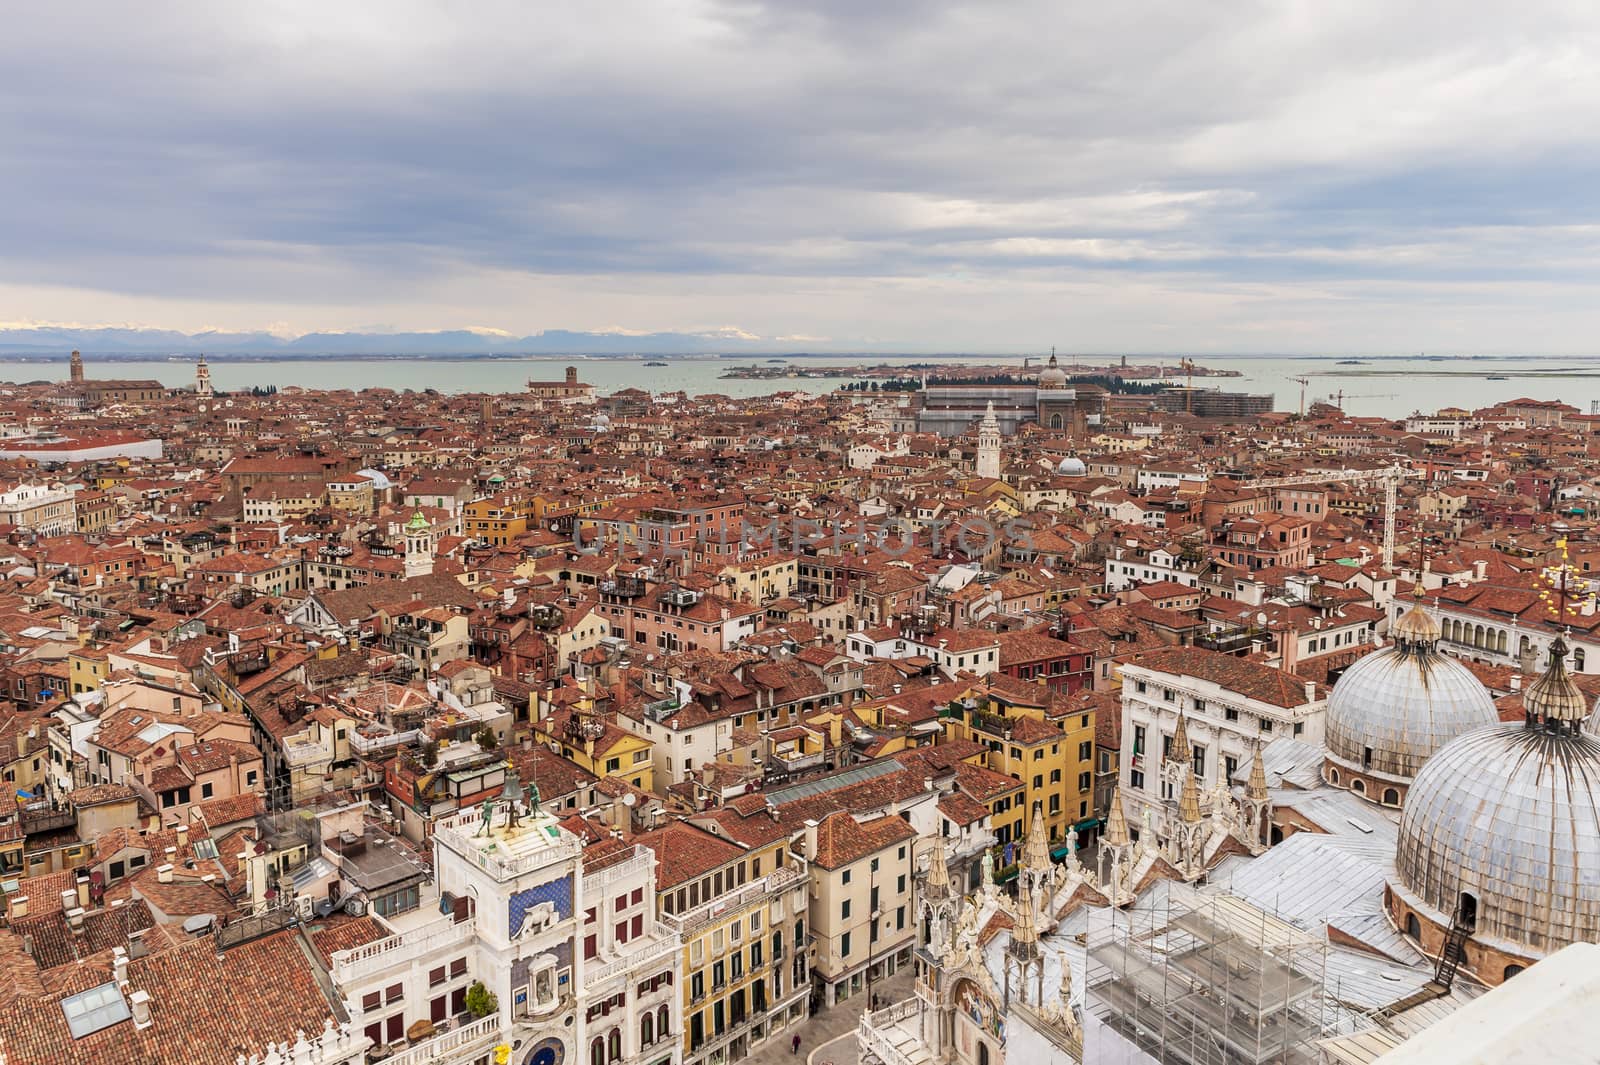 Panoramic aerial view from the bell tower of Saint Mark's square which offers a magnificent panorama over the rooftops of Venice and beyond.